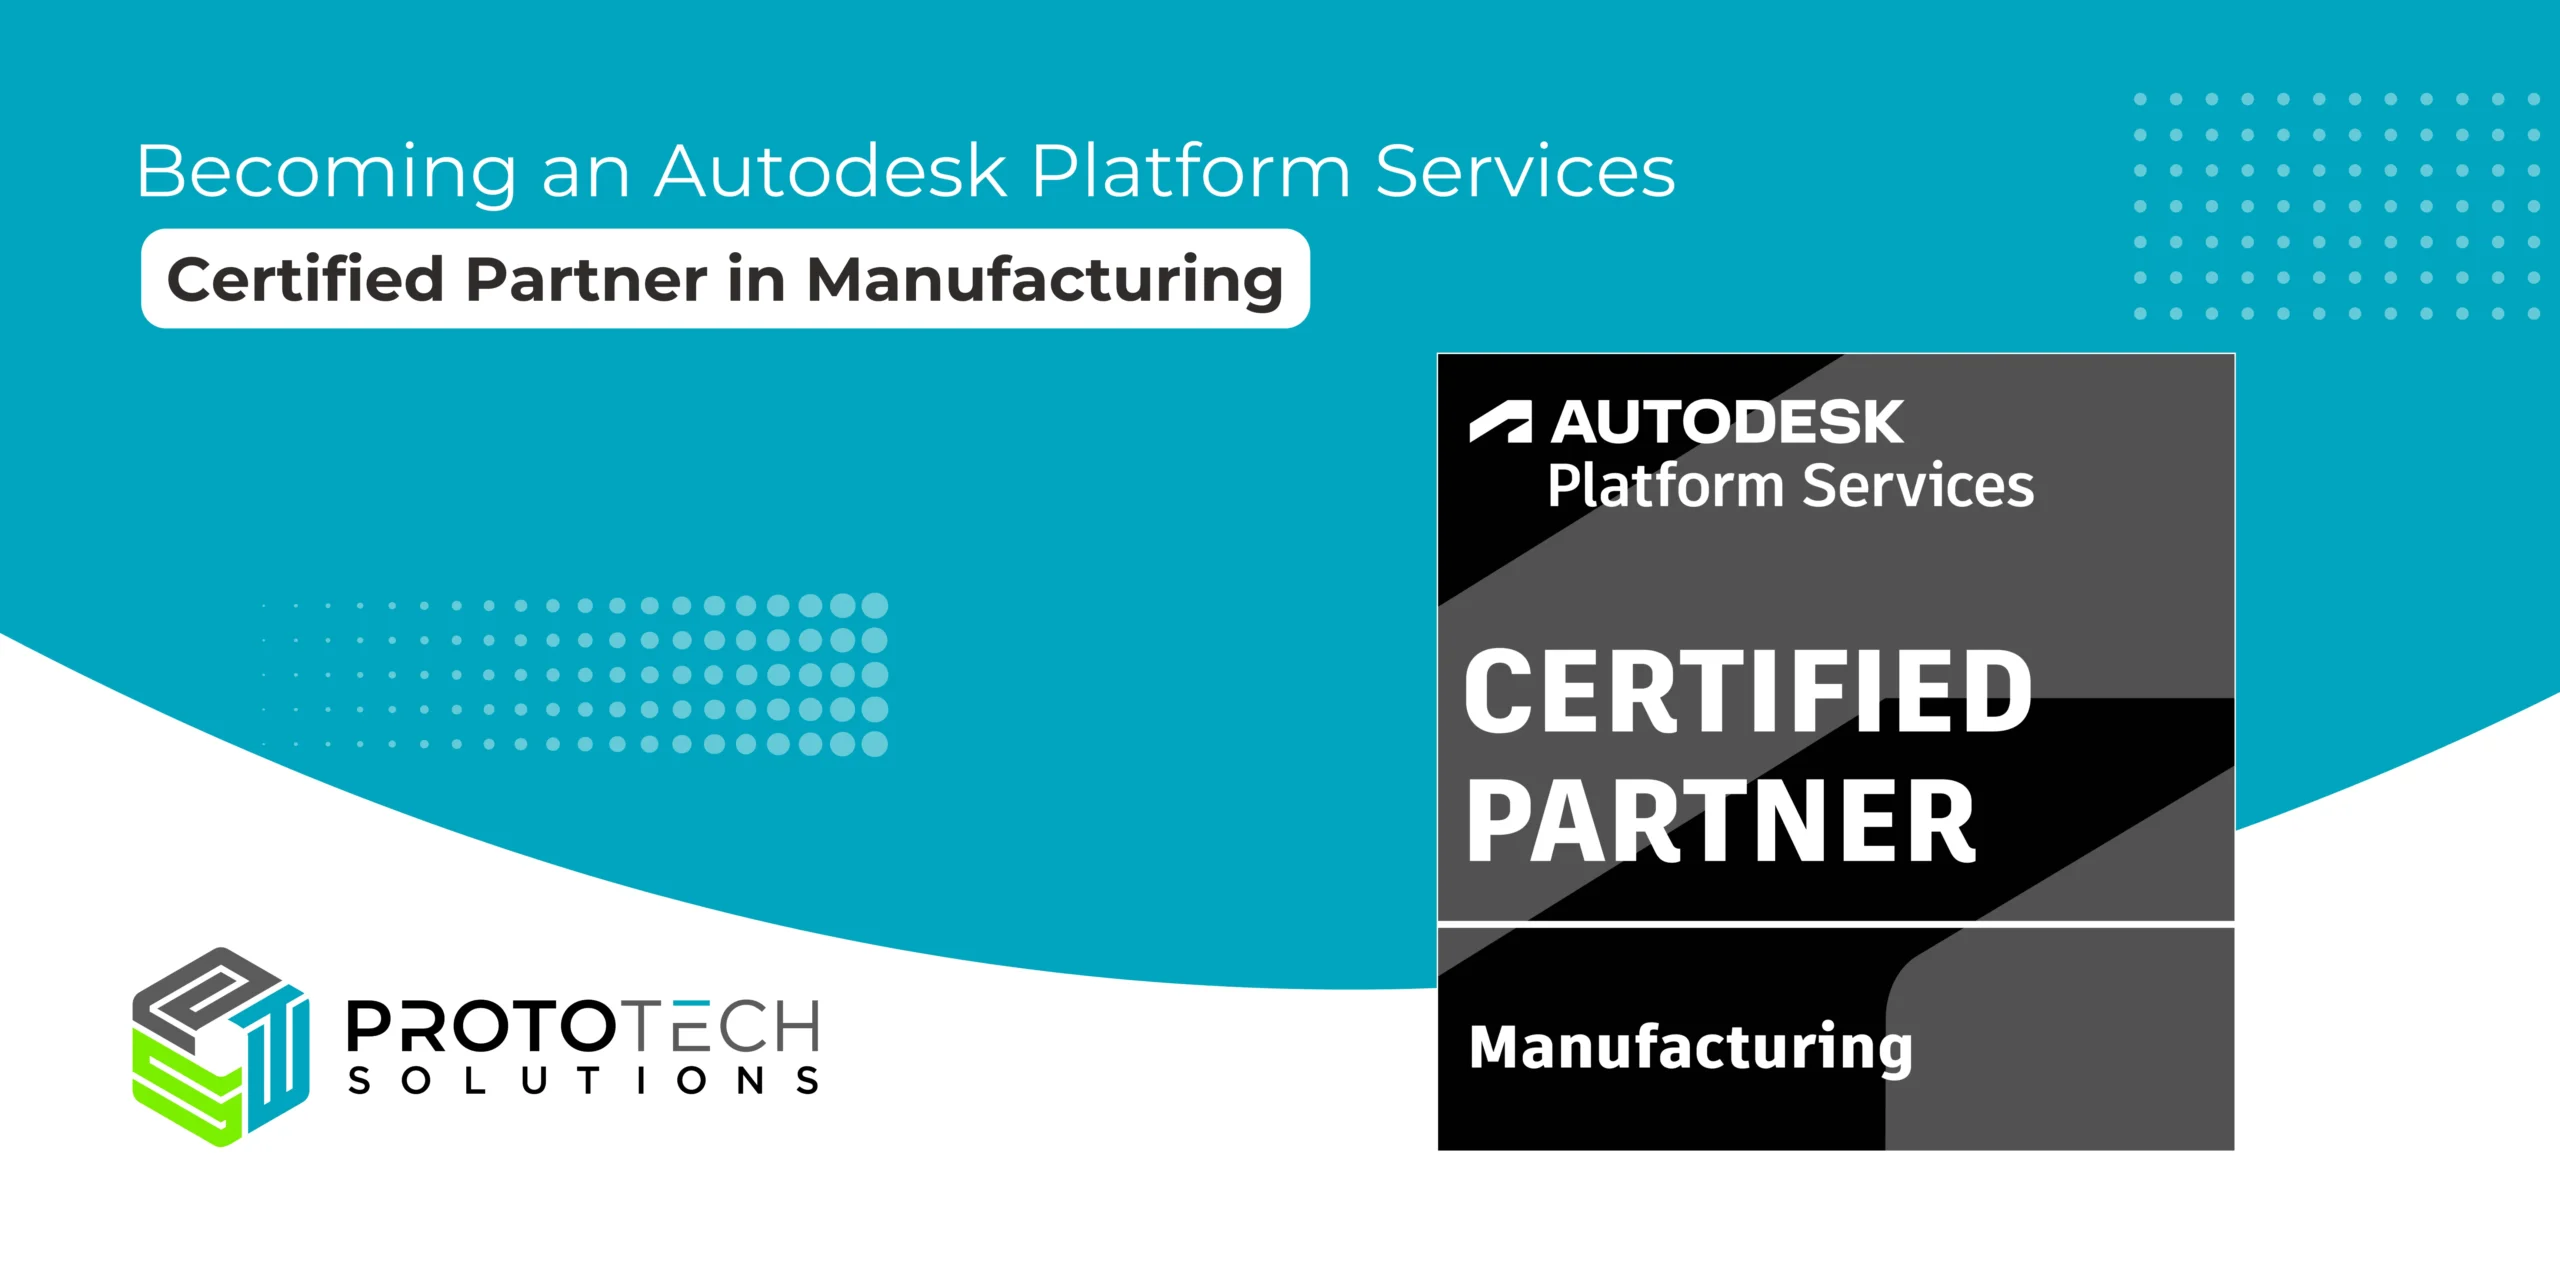 ProtoTech Solutions: Becoming an Autodesk Platform Services Certified Partner in Manufacturing